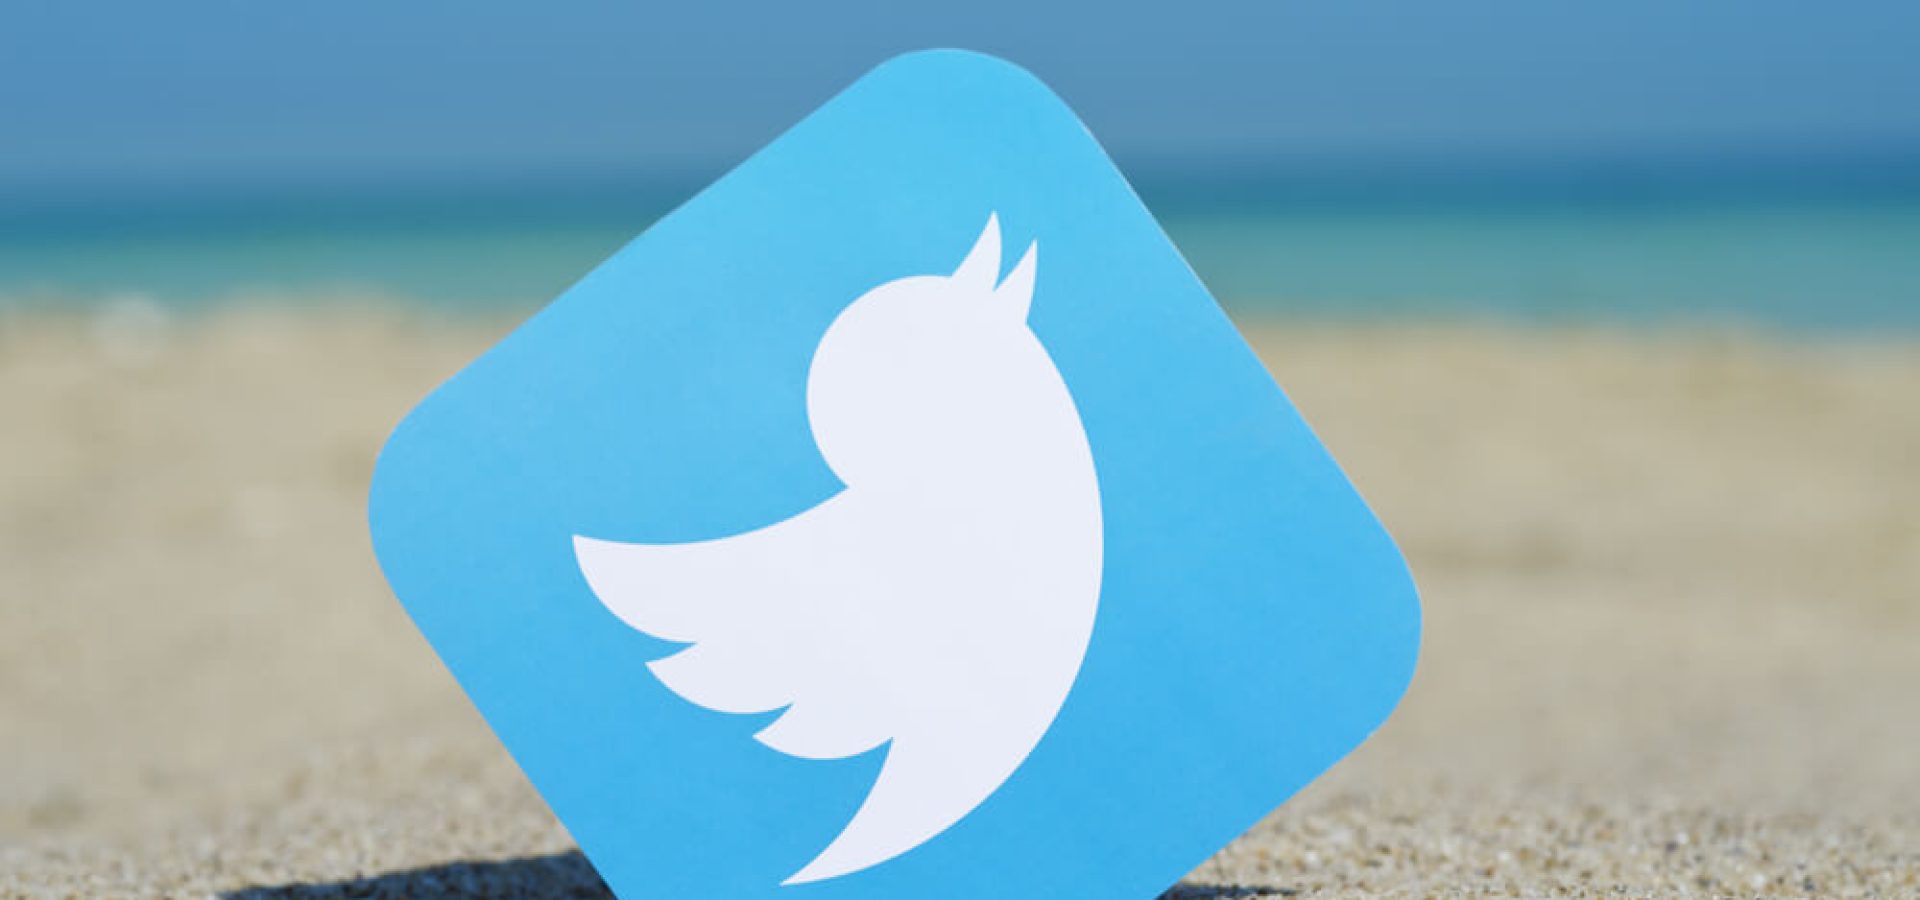 Twitter logotype printed on paper and placed in the sand against the sea.